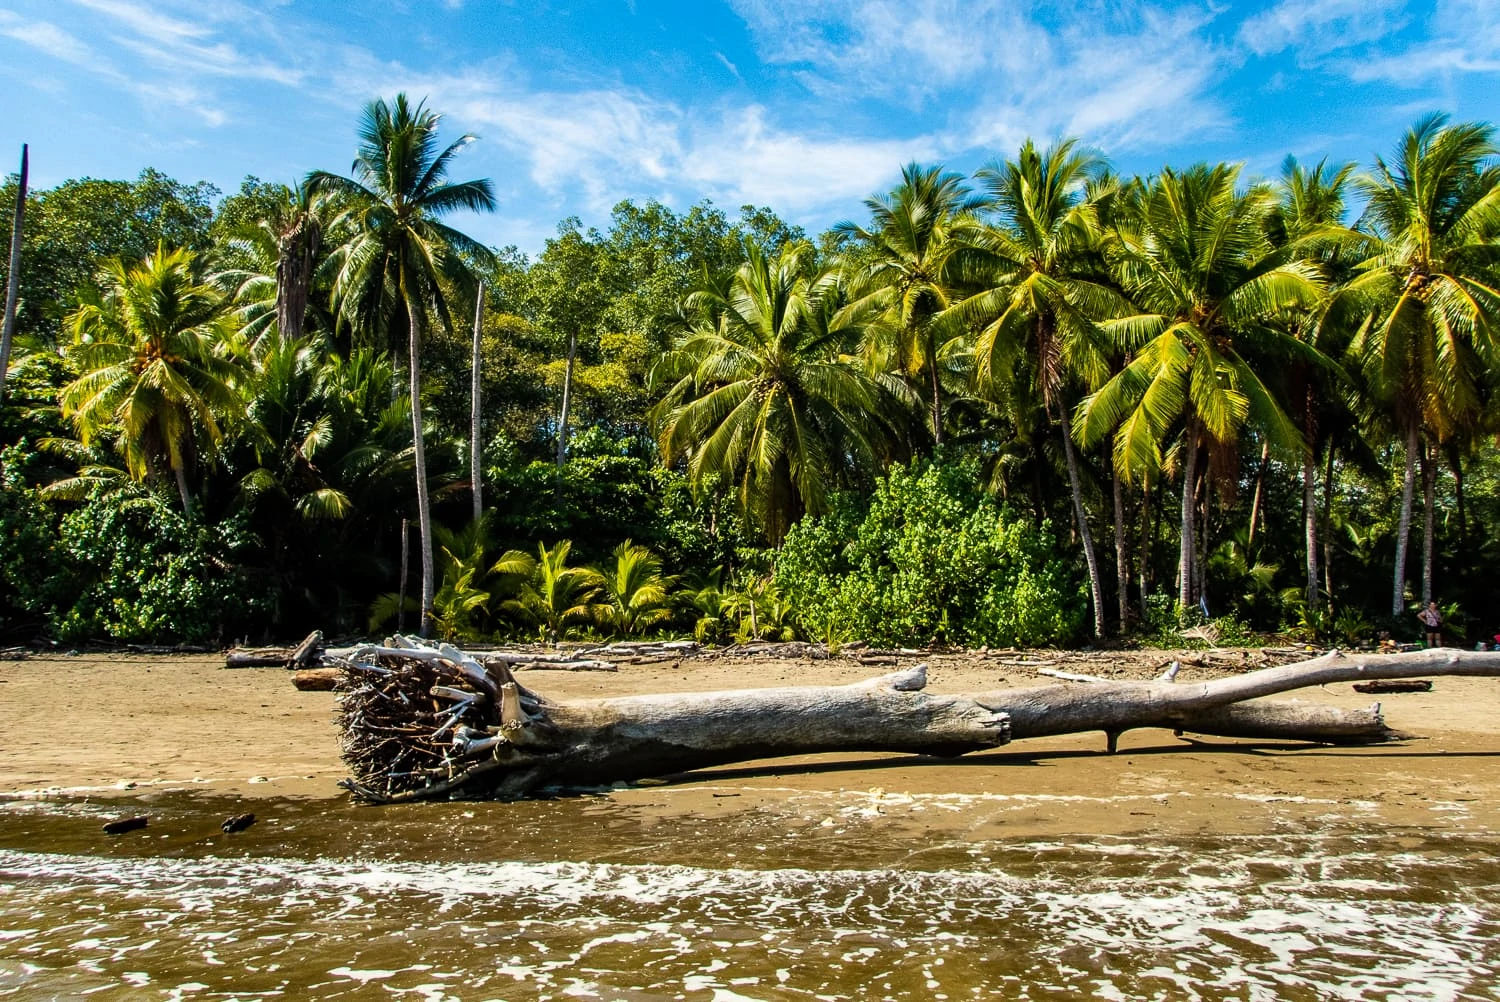 Blue sky, palm trees, and a sandy beach with driftwood on the Caribbean coast of Costa Rica.